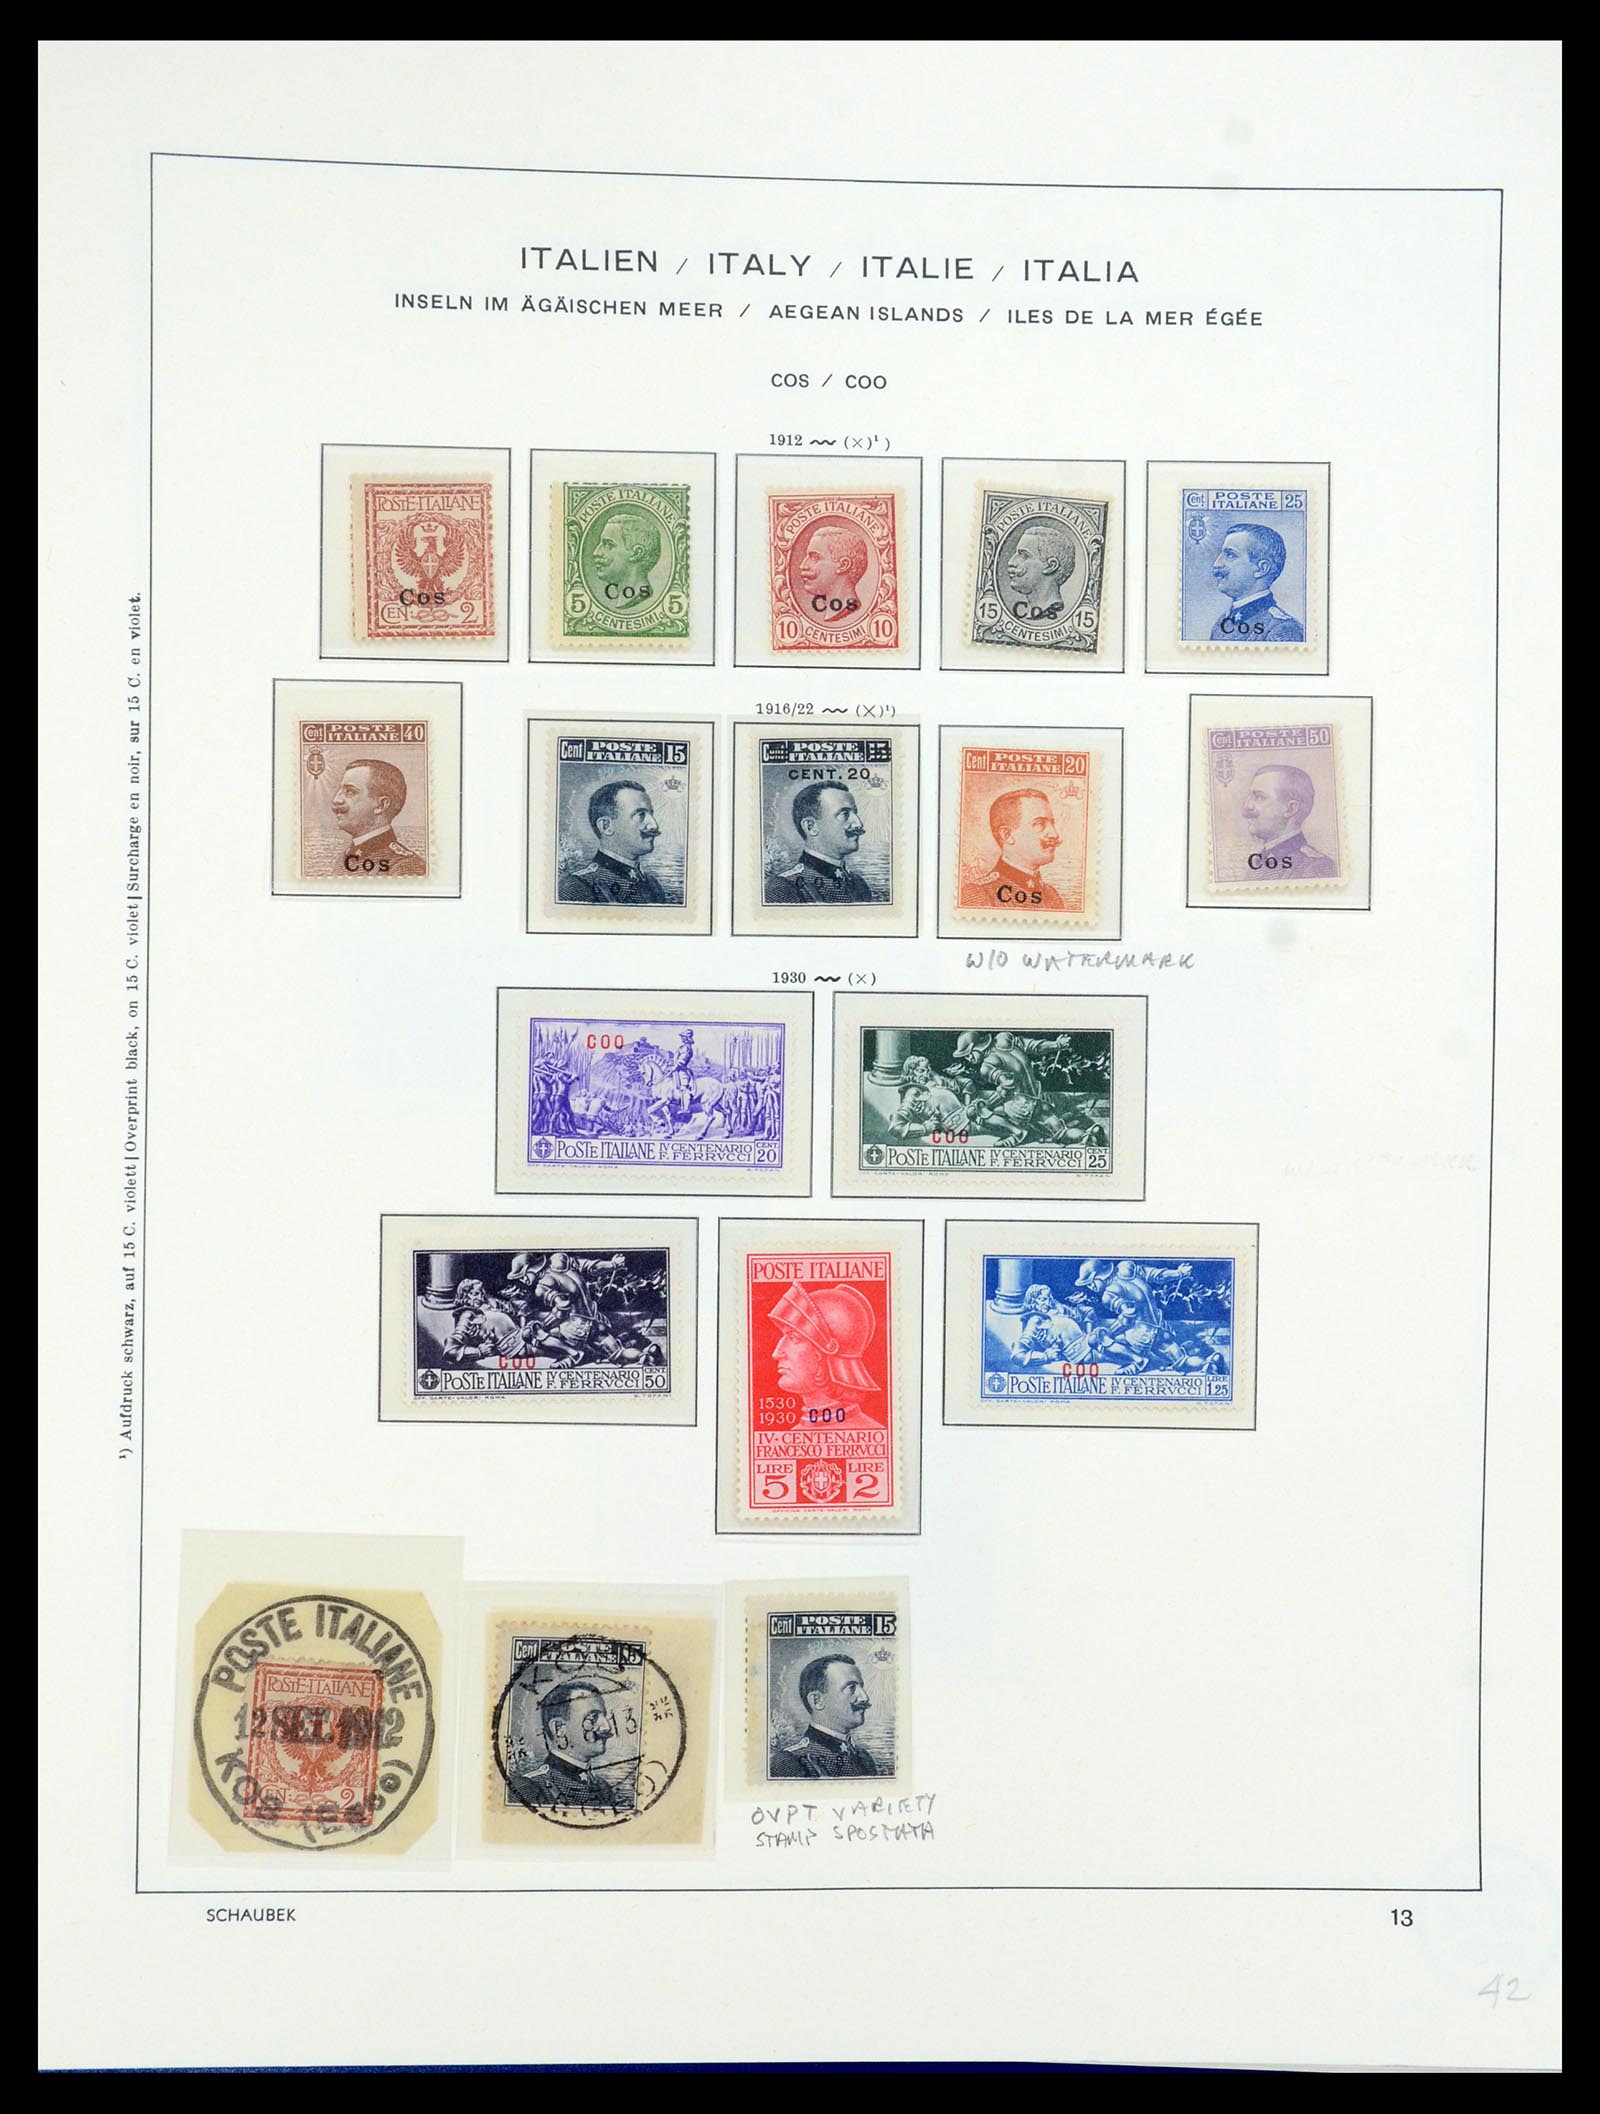 36181 016 - Stamp collection 36181 Italian Aegean Islands 1912-1941.